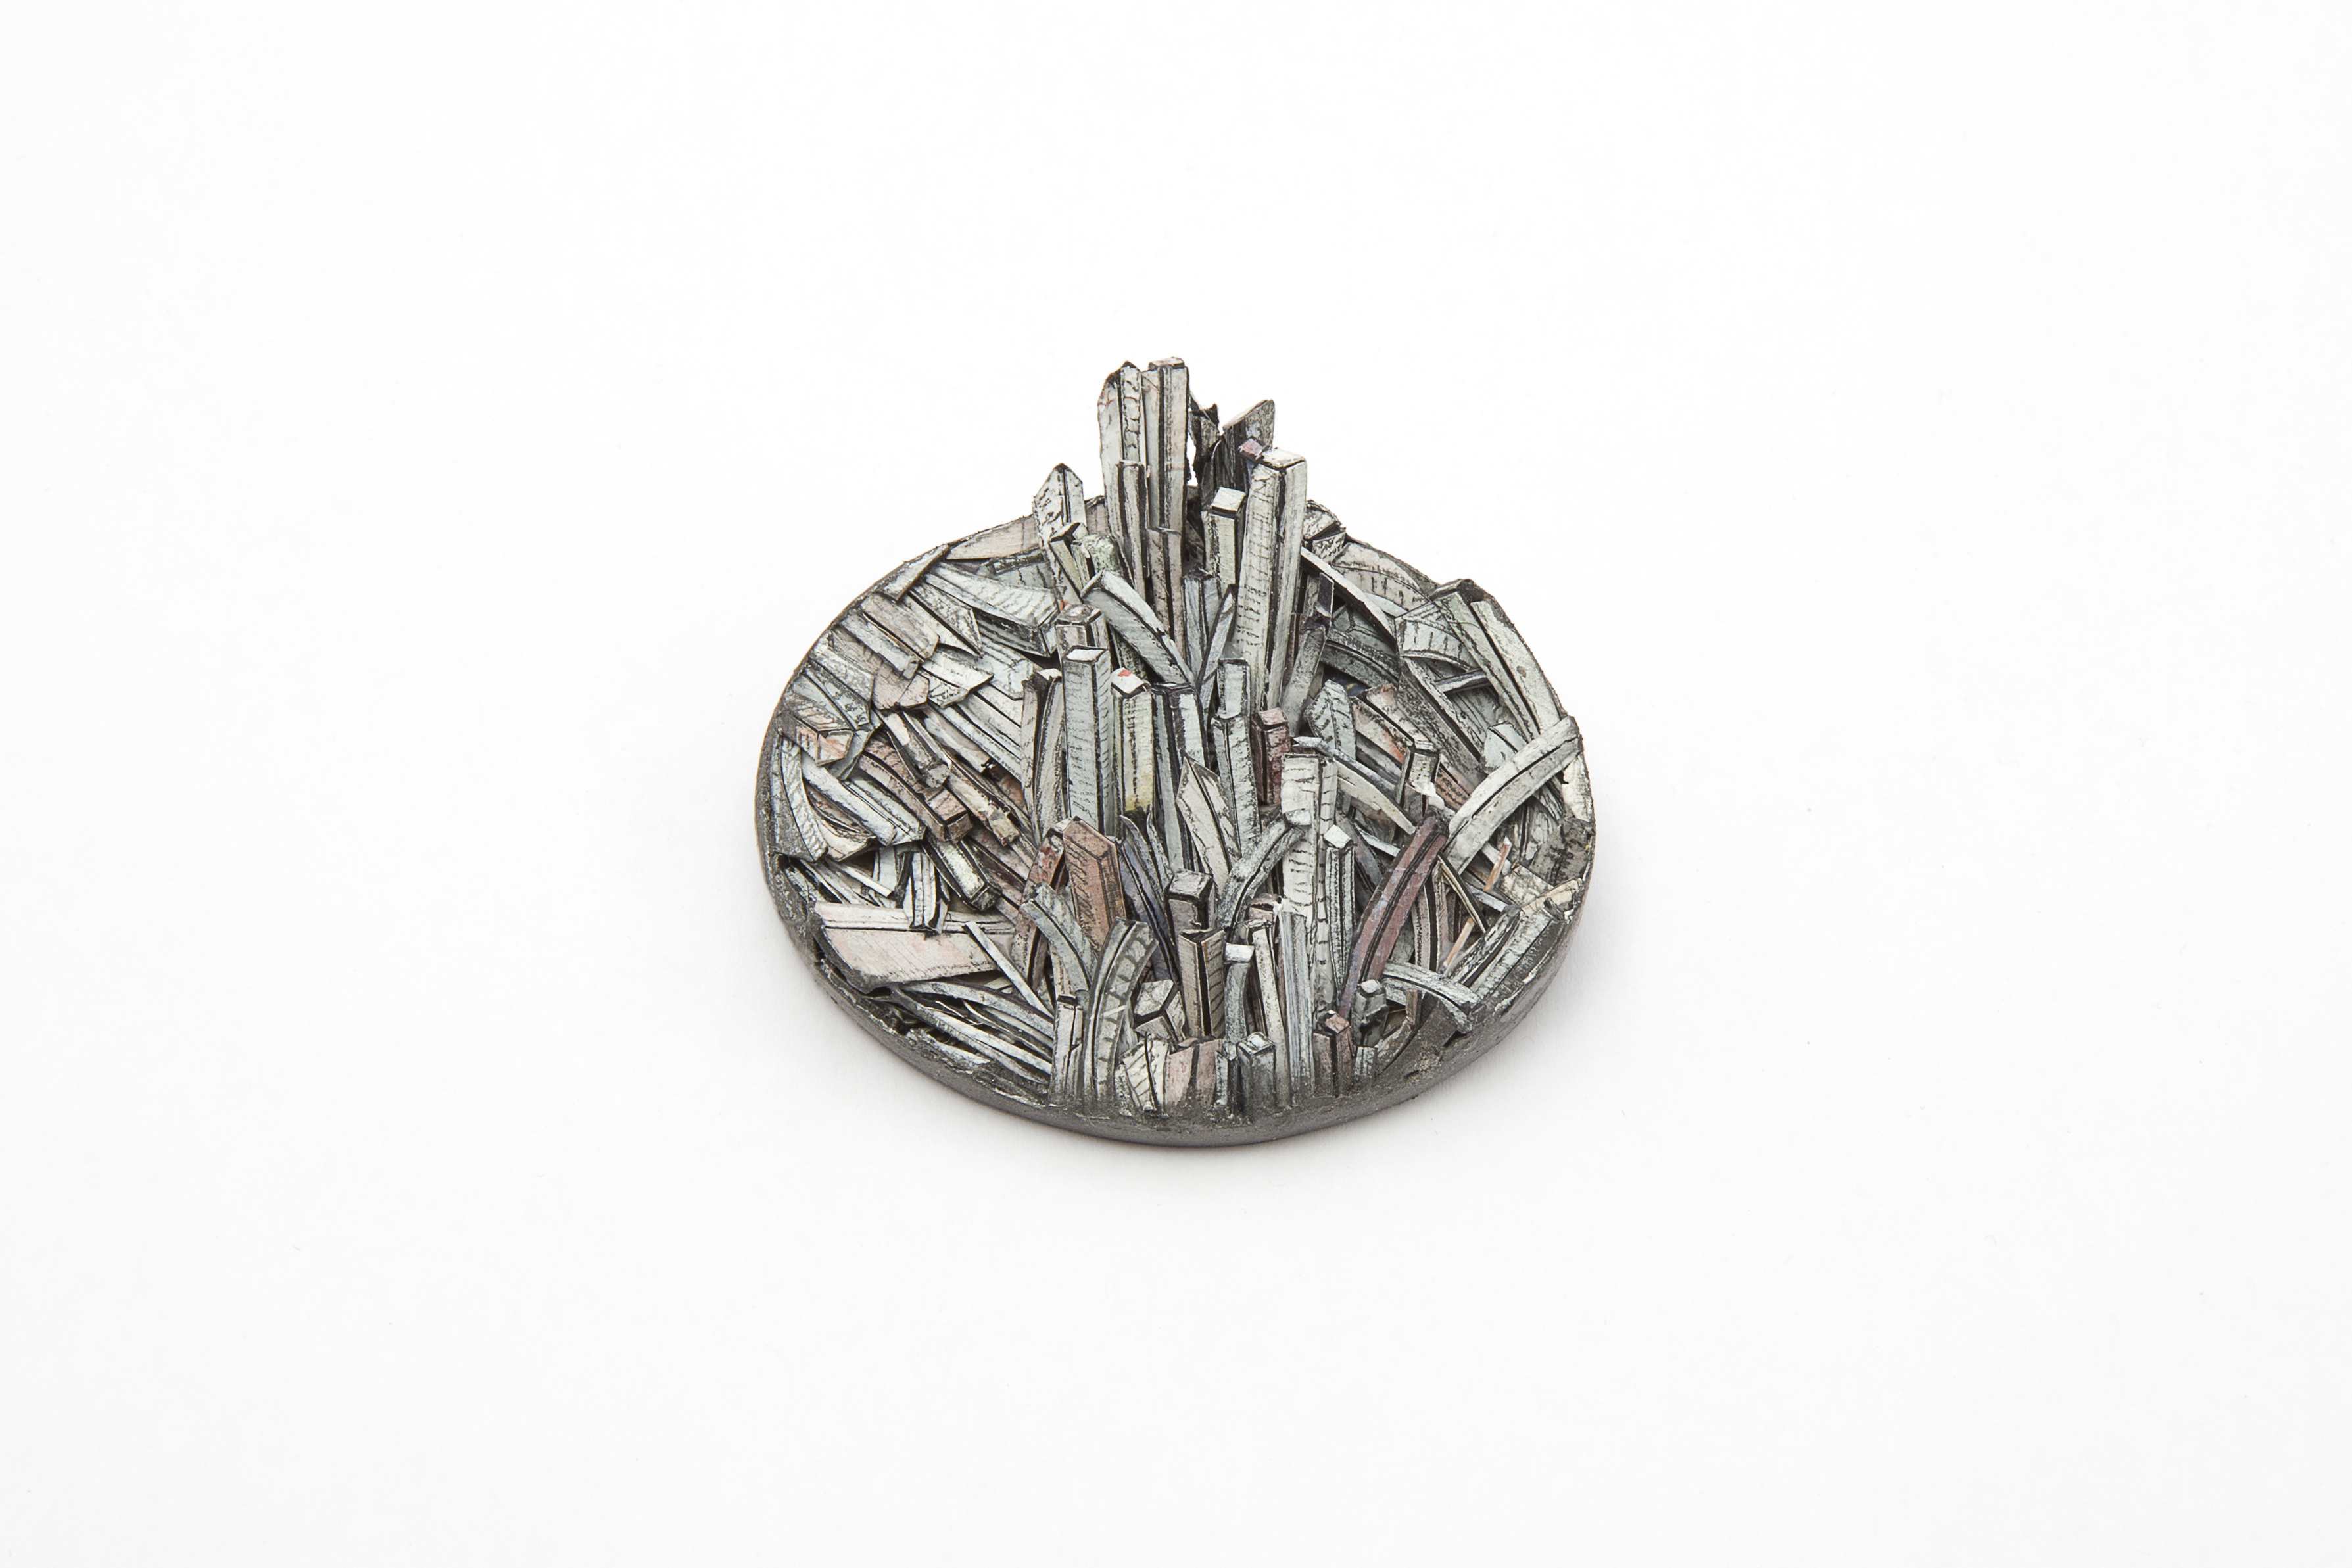 Untitled | Brooch | 2018 | Paper, paint, silver, wood, graphite, stainless steel | 54X52X25mm